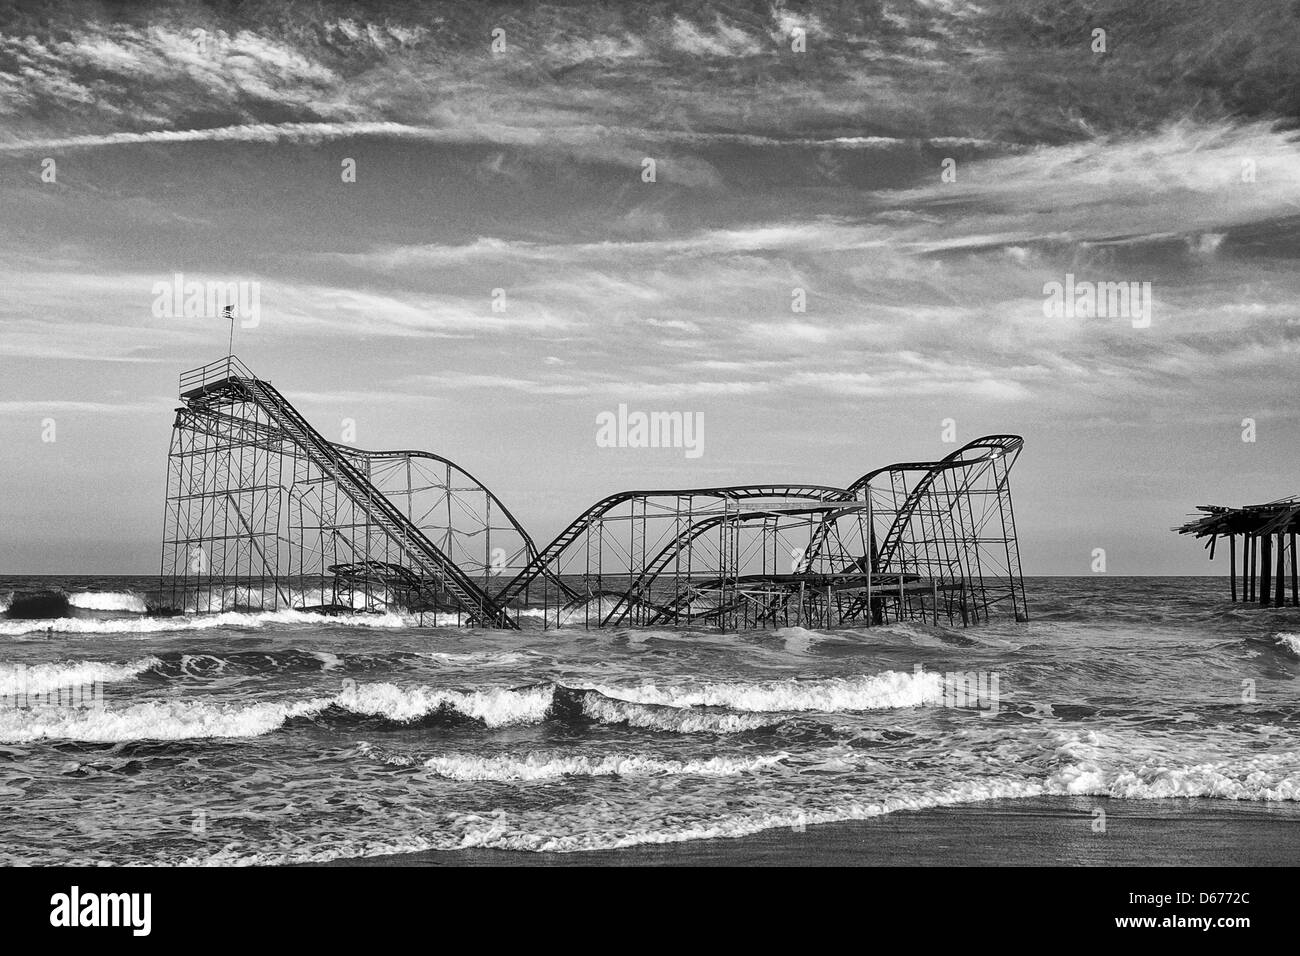 The Jet Star roller coaster still sets in the Atlantic Ocean in Seaside Heights, NJ USA in black and white.  The roller coaster was deposited there by Hurricane Sandy in October 2012 and was removed in May of 2013 Stock Photo